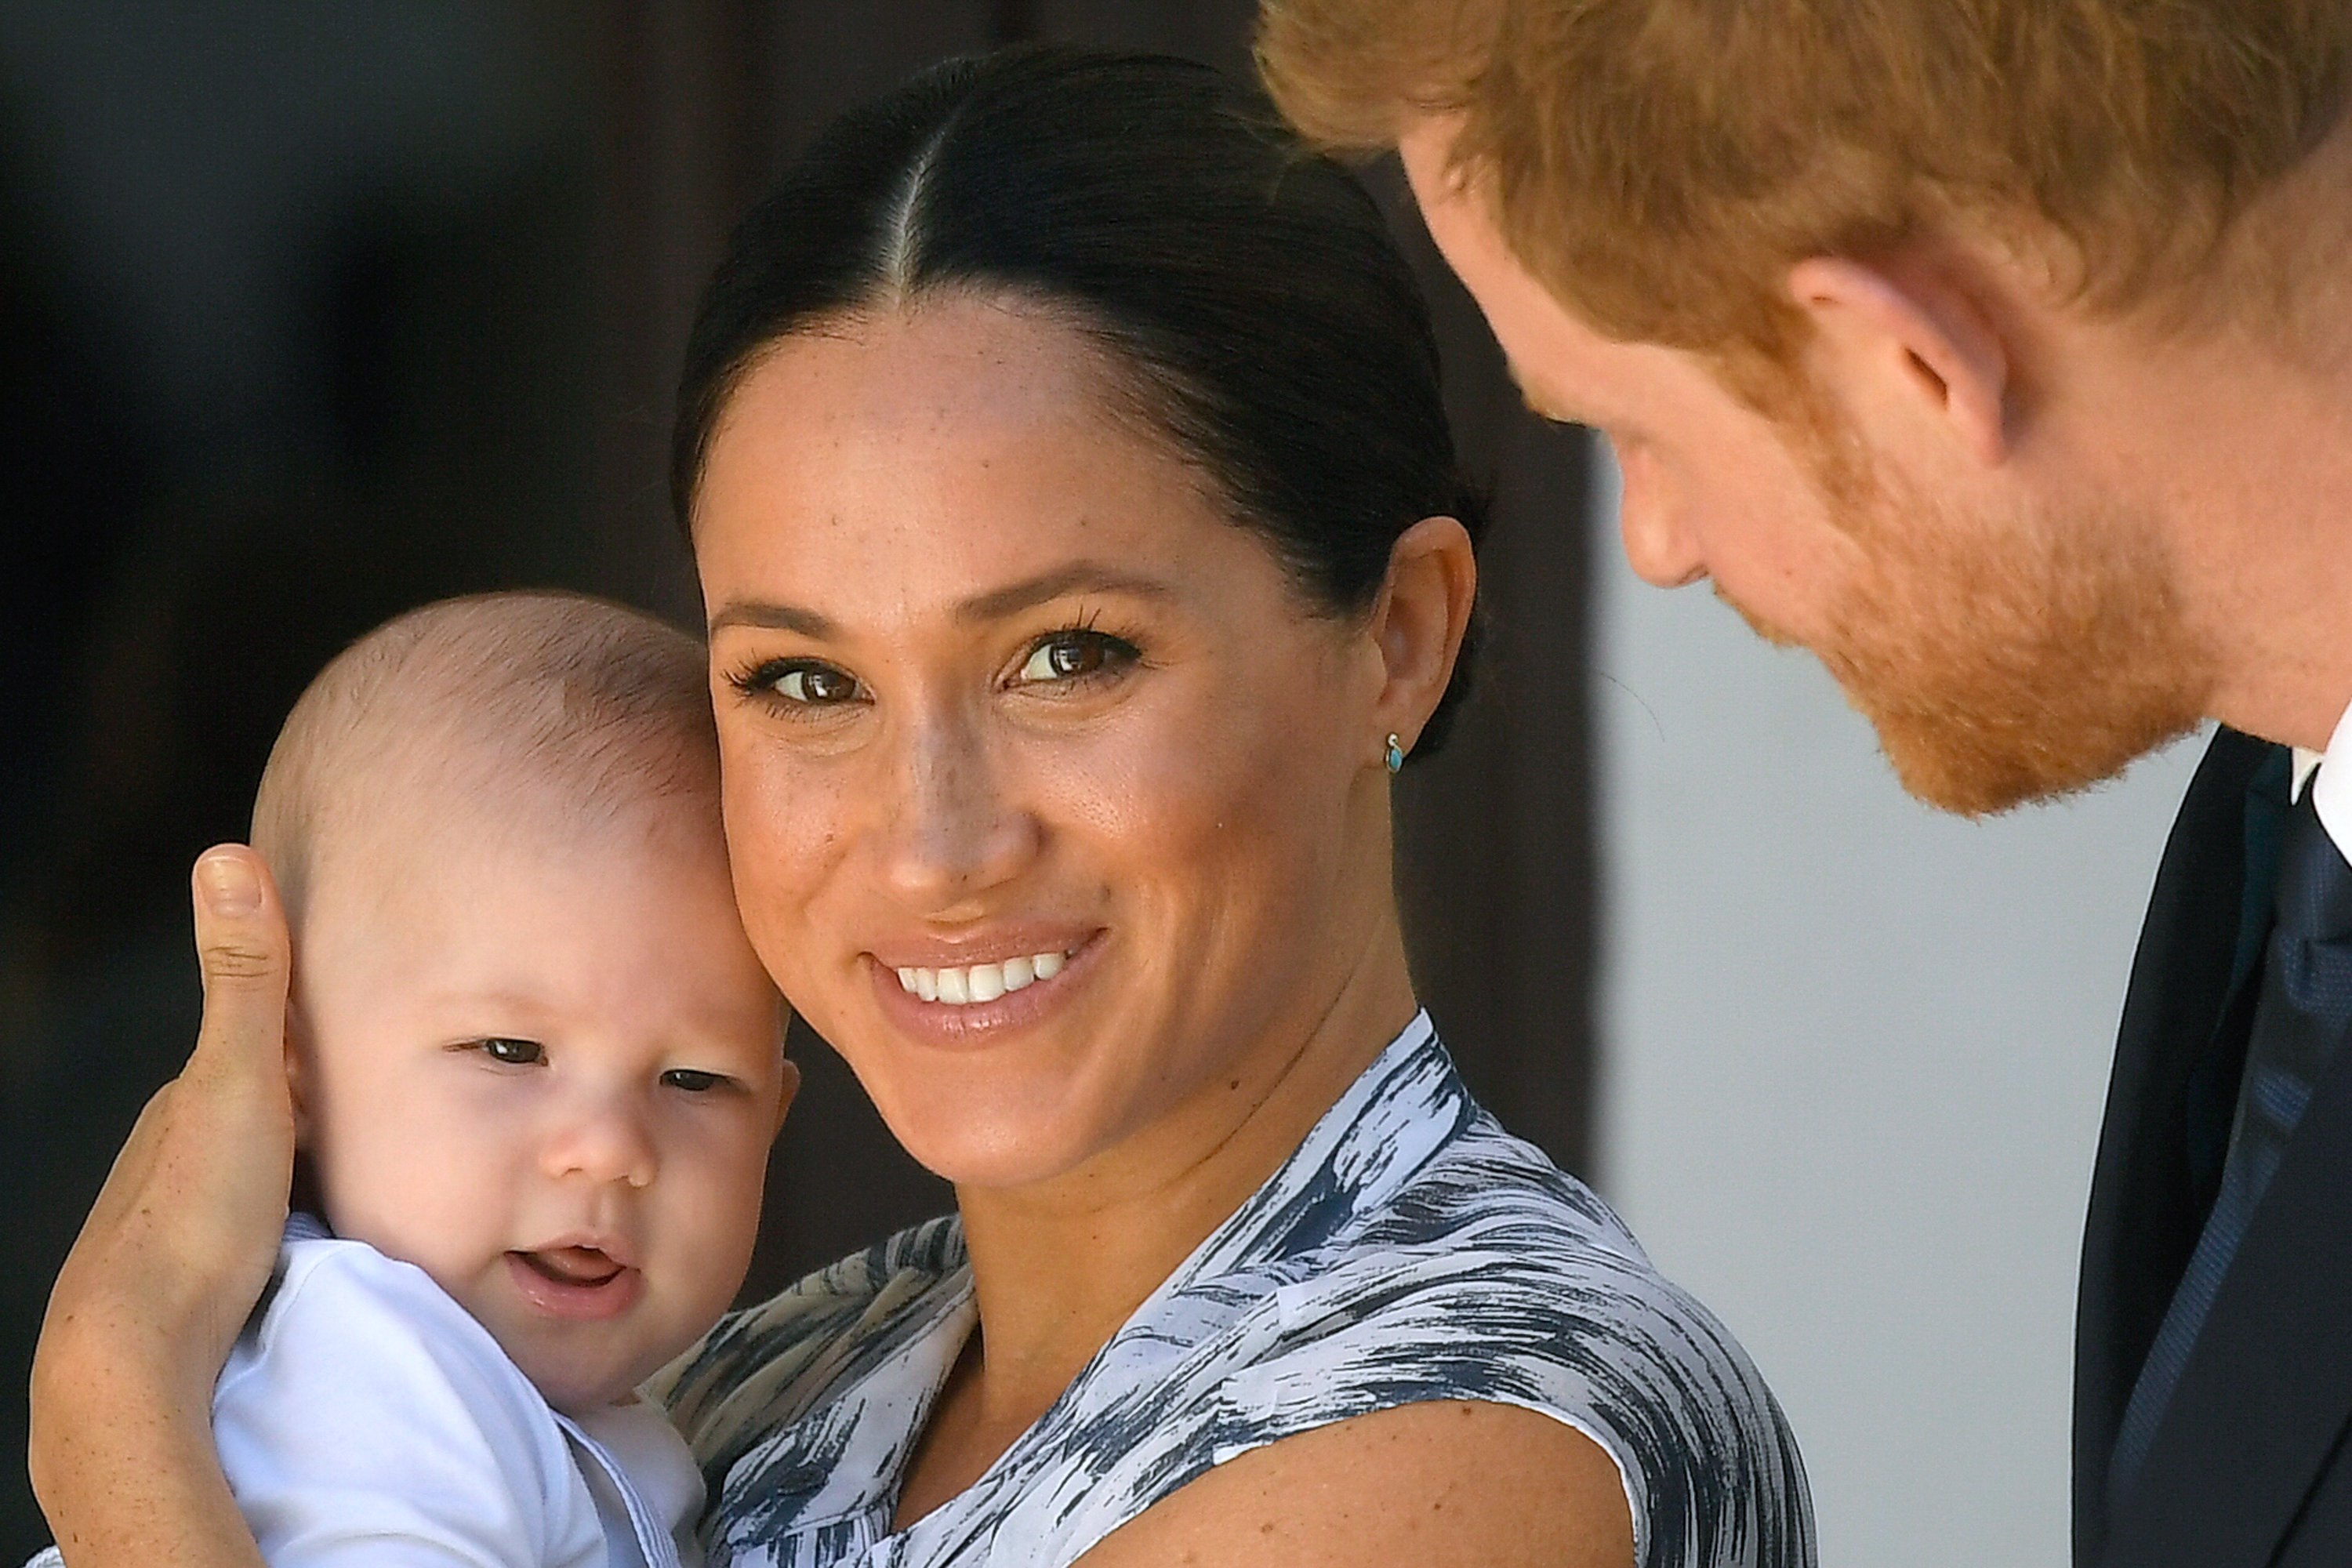 Prince Harry, Meghan Markle and their baby son Archie Mountbatten-Windsor during their royal tour of South Africa on September 25, 2019 in Cape Town, South Africa. / Source: Getty Images